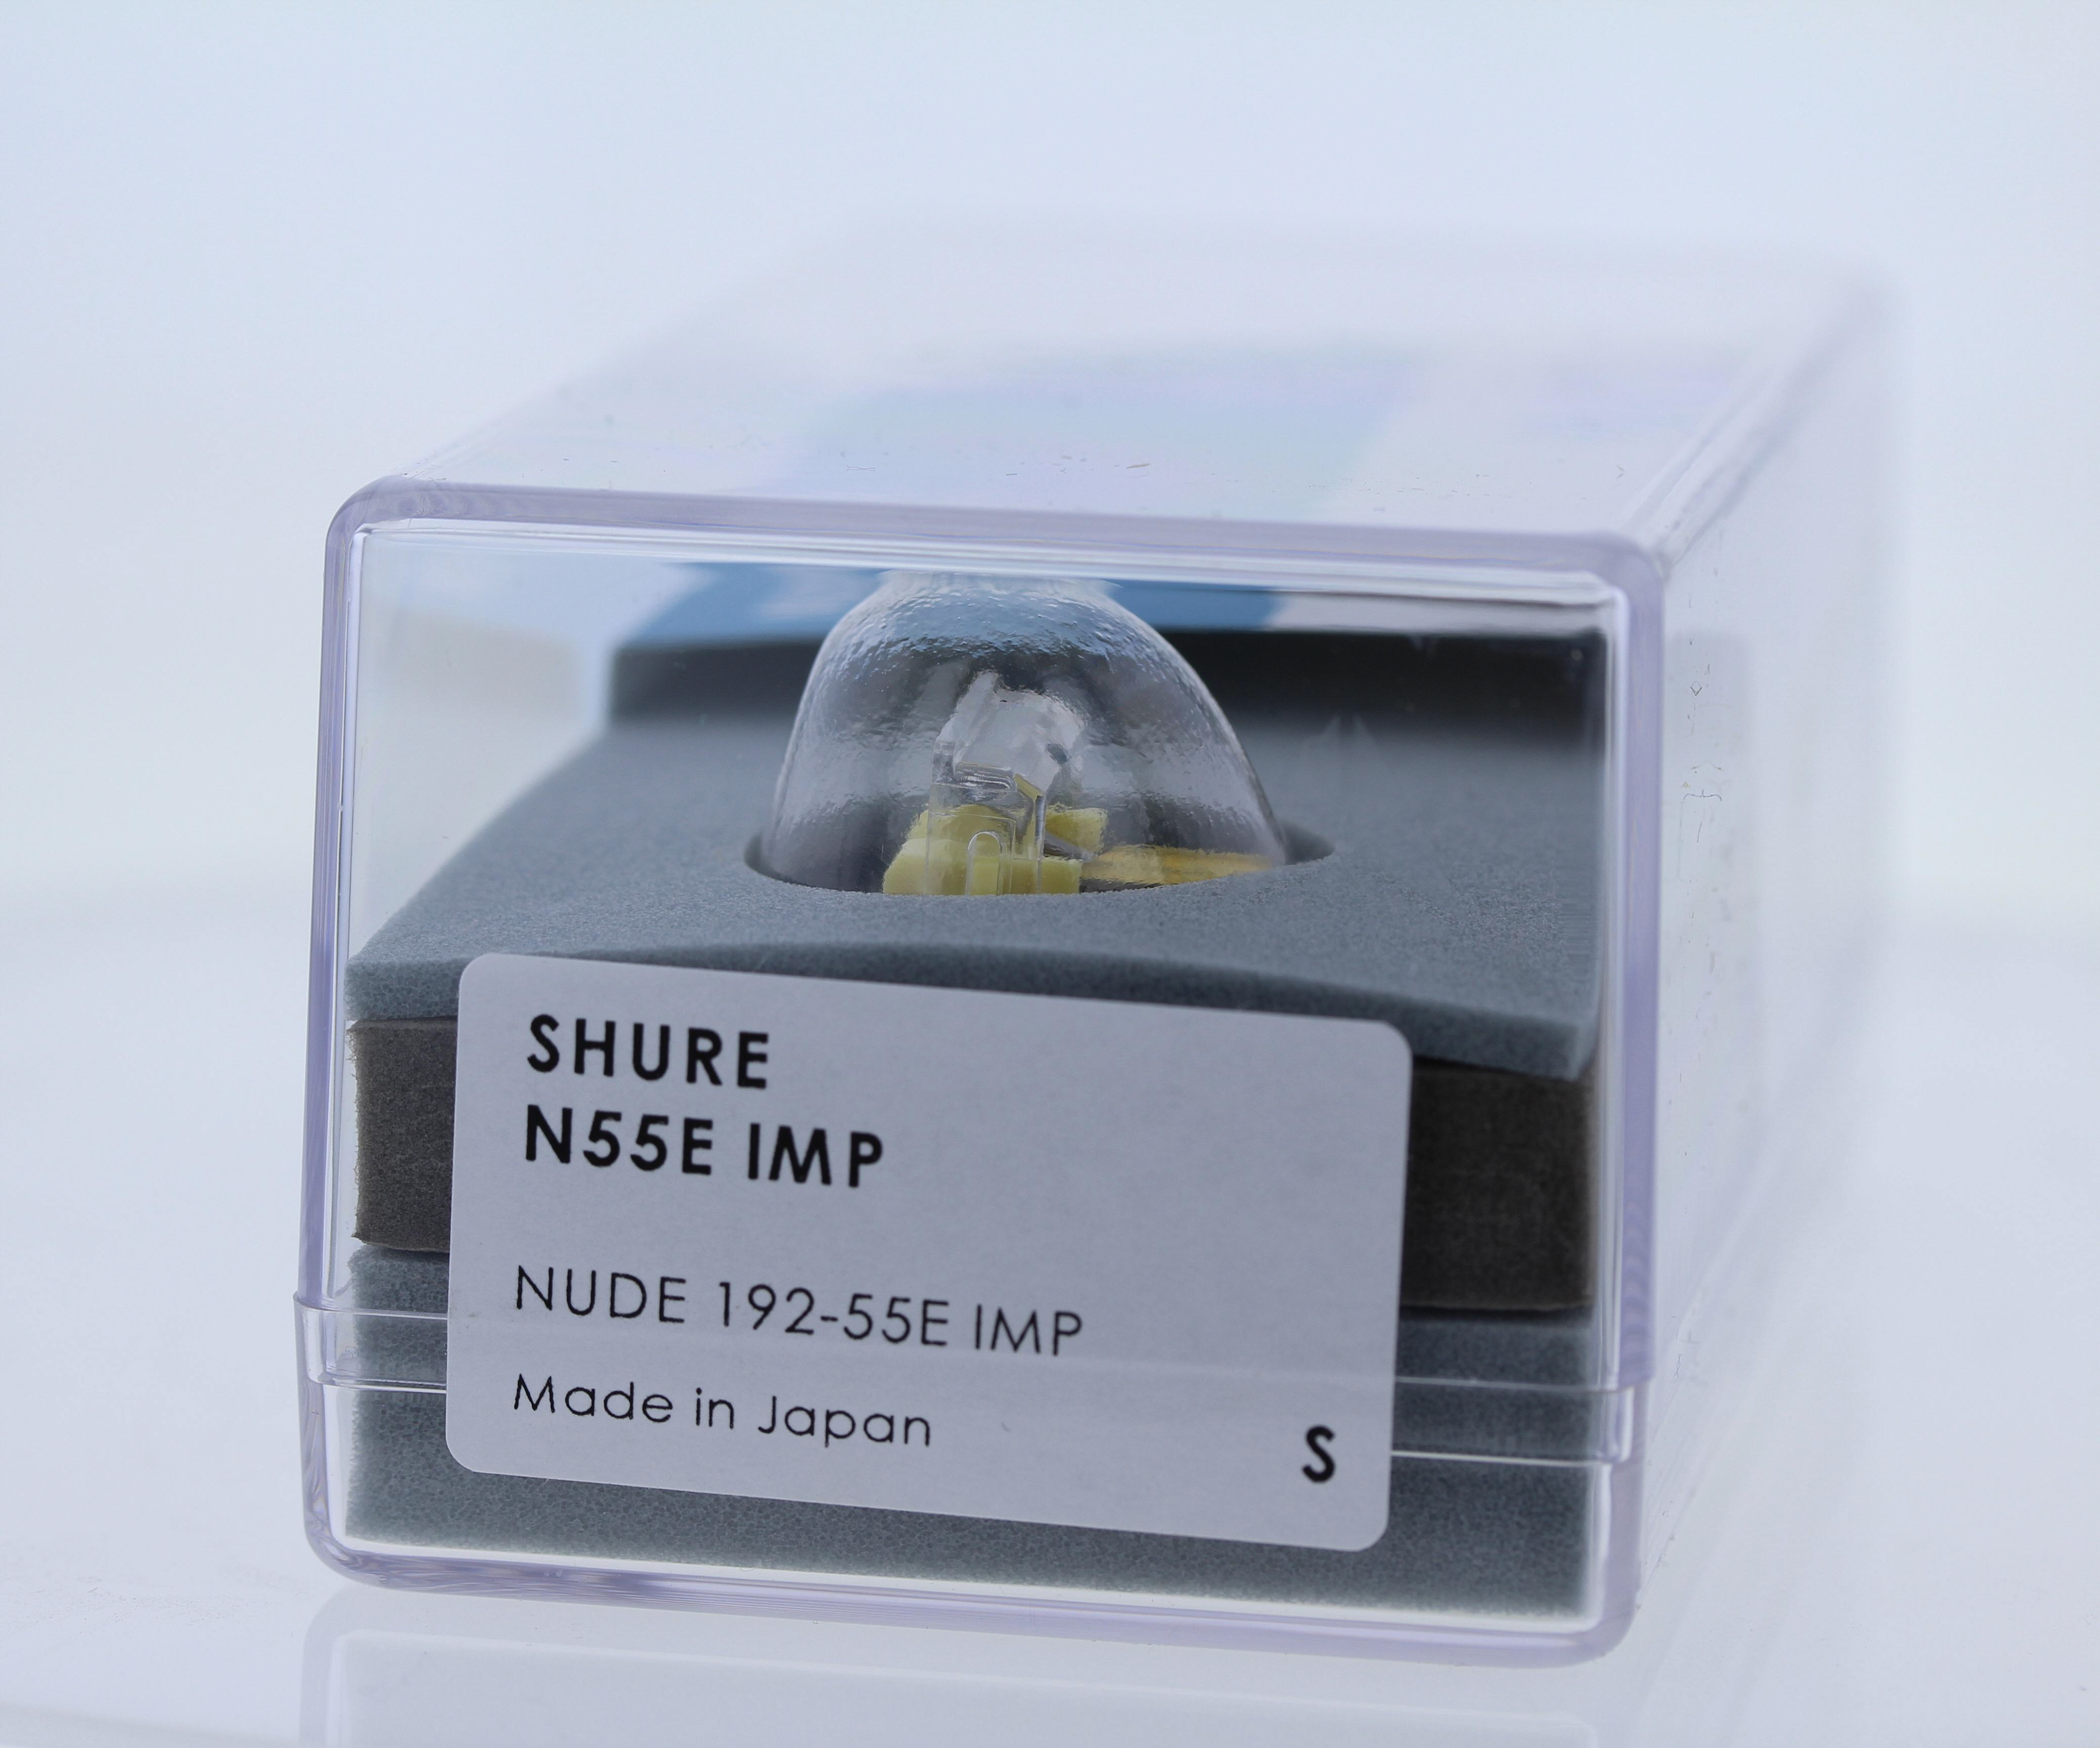 N E Improved Nude Jico Replacement For Shure N E Improved Stylus Lp